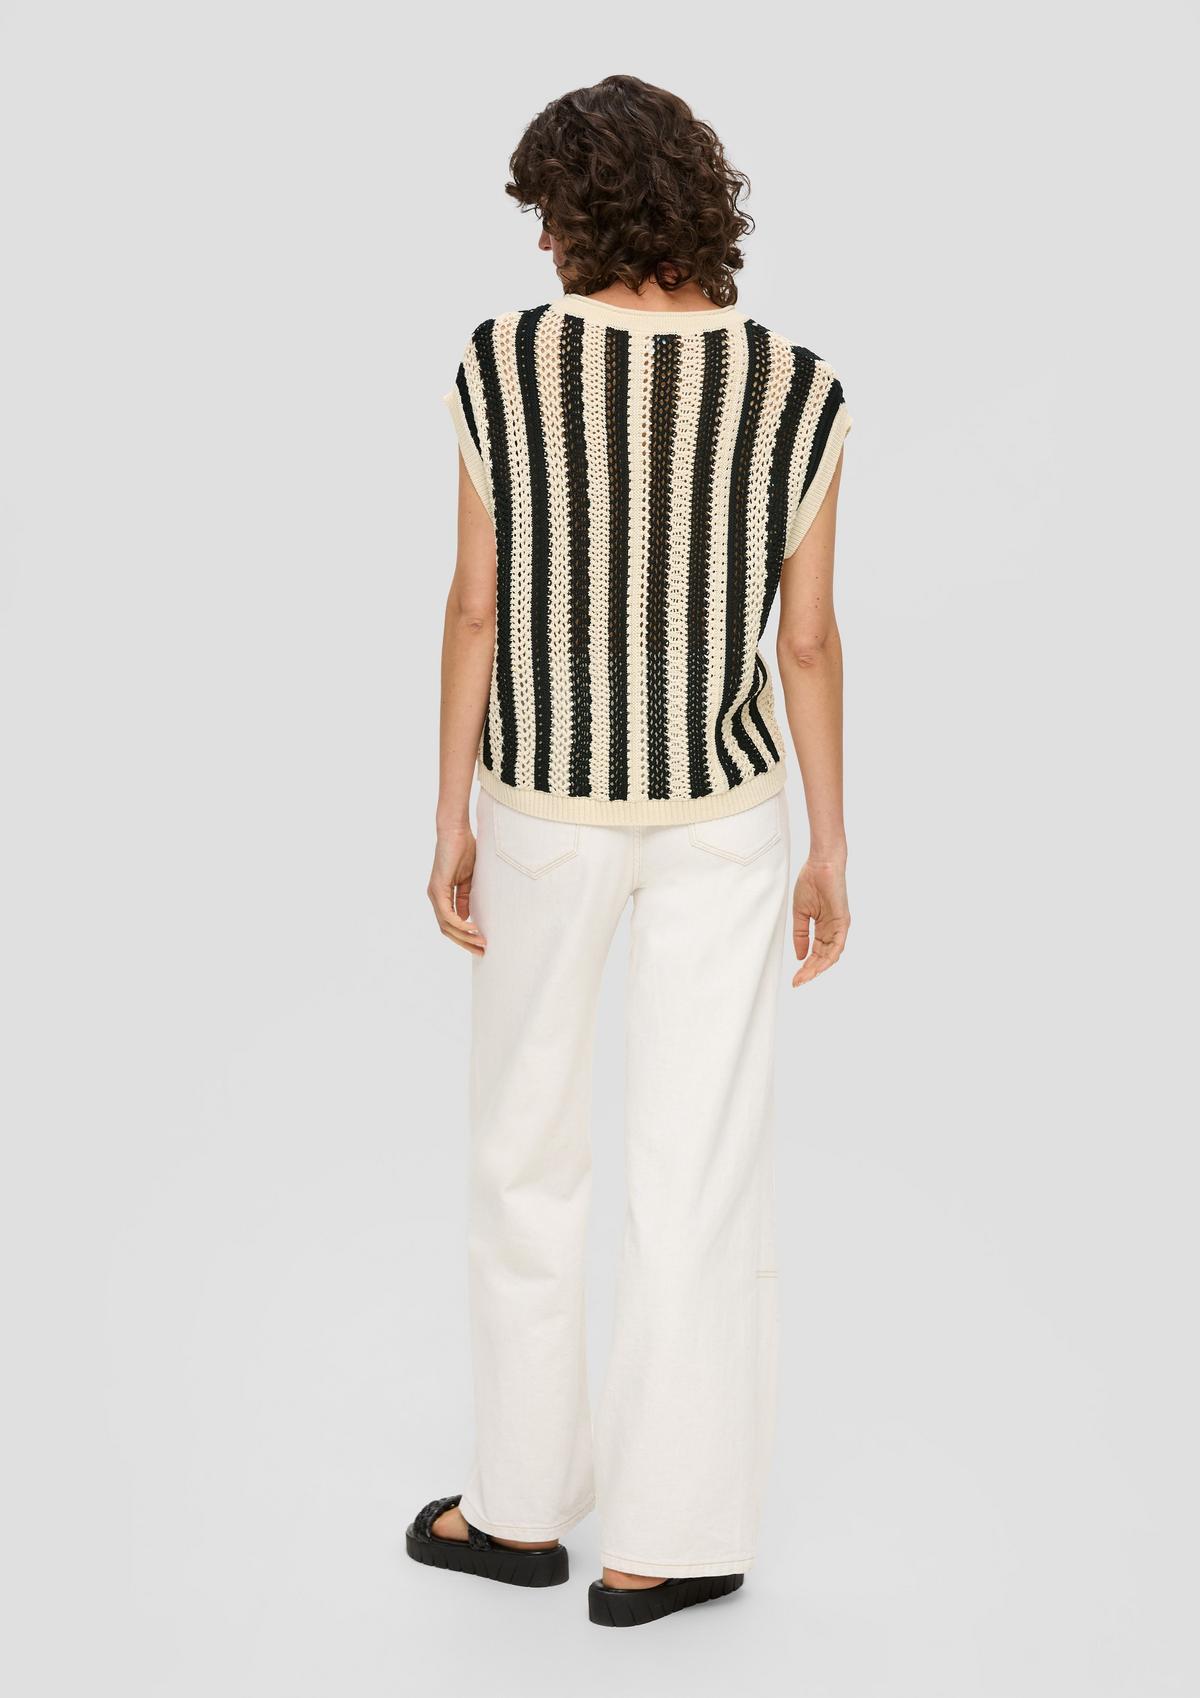 s.Oliver Sleeveless knitted top made of cotton with dropped shoulders